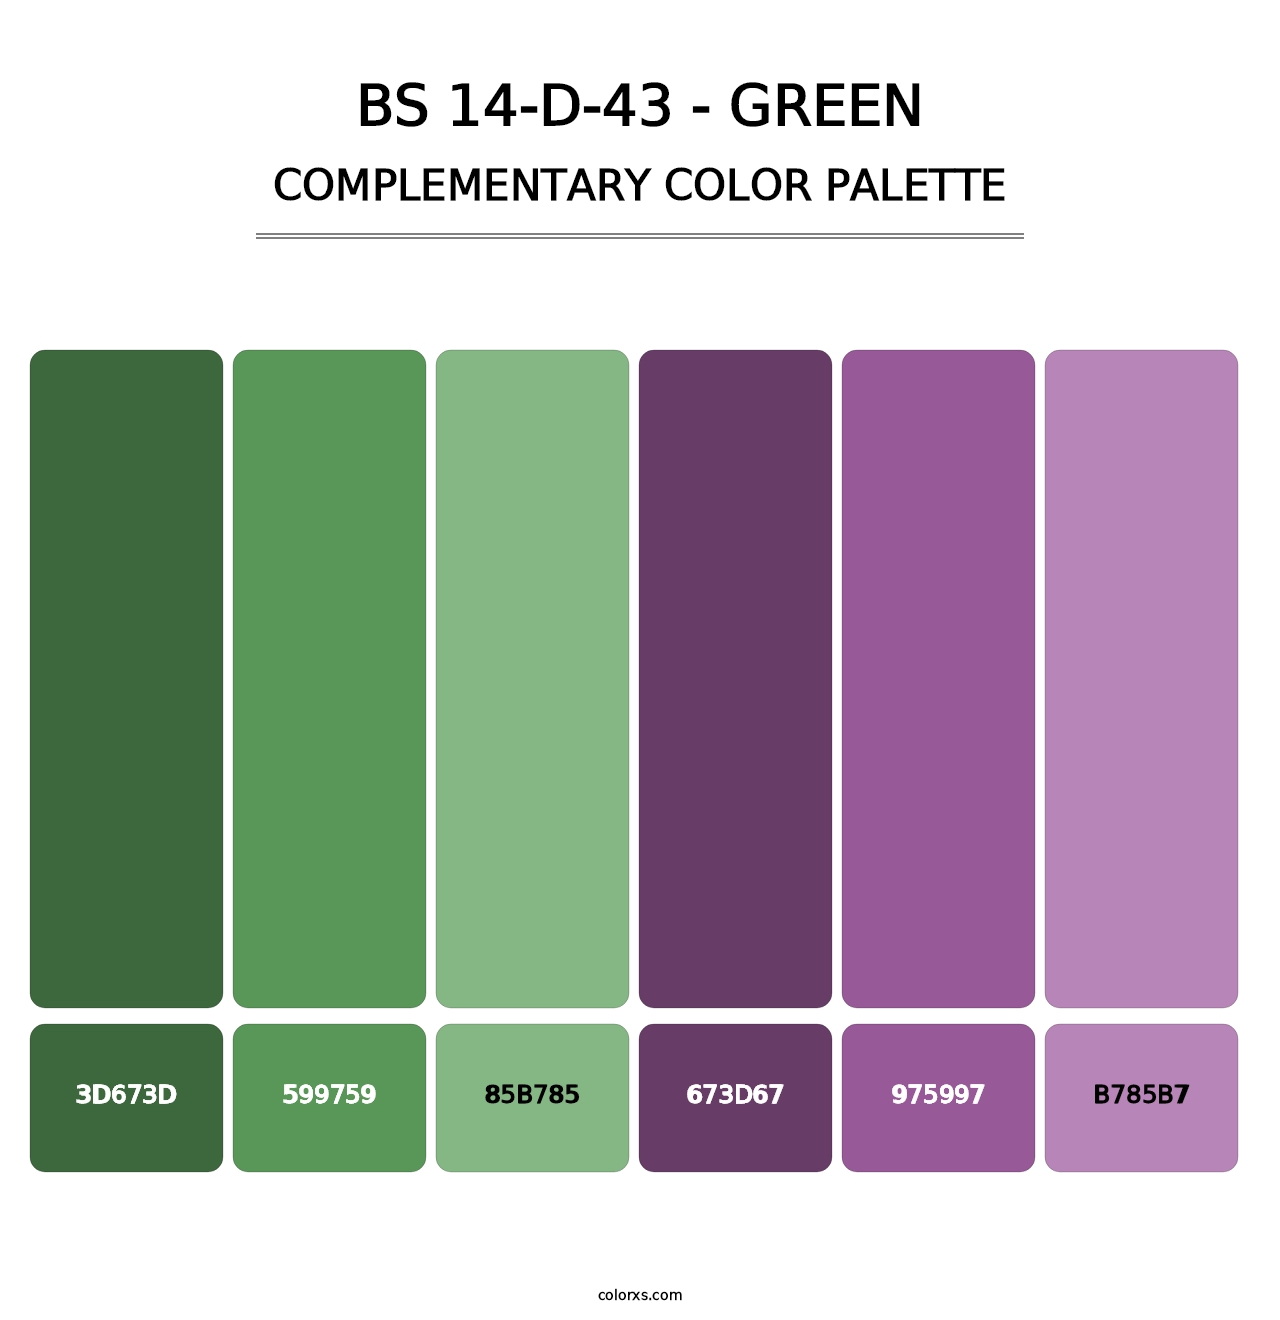 BS 14-D-43 - Green - Complementary Color Palette